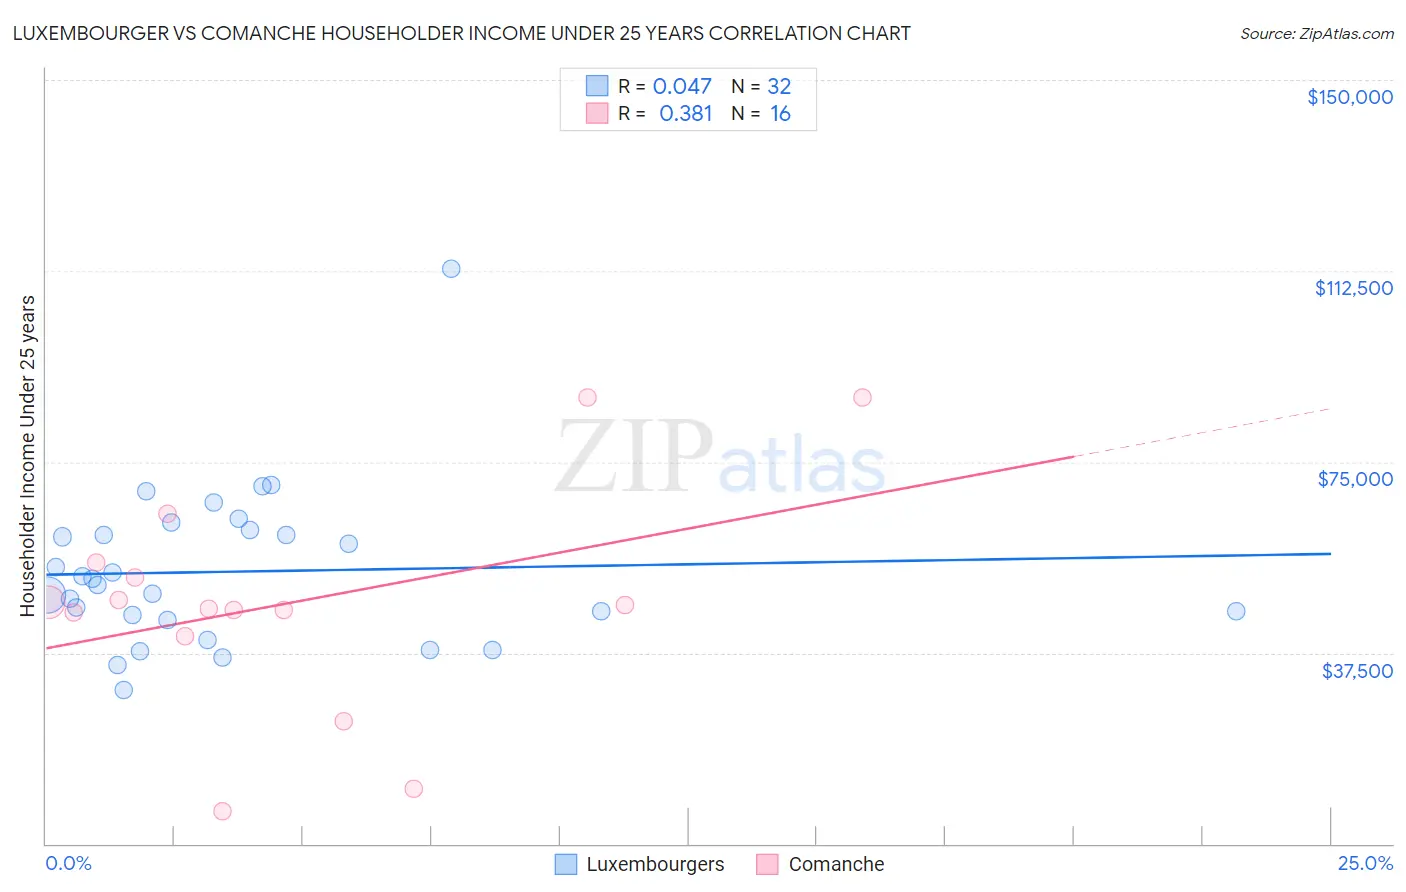 Luxembourger vs Comanche Householder Income Under 25 years